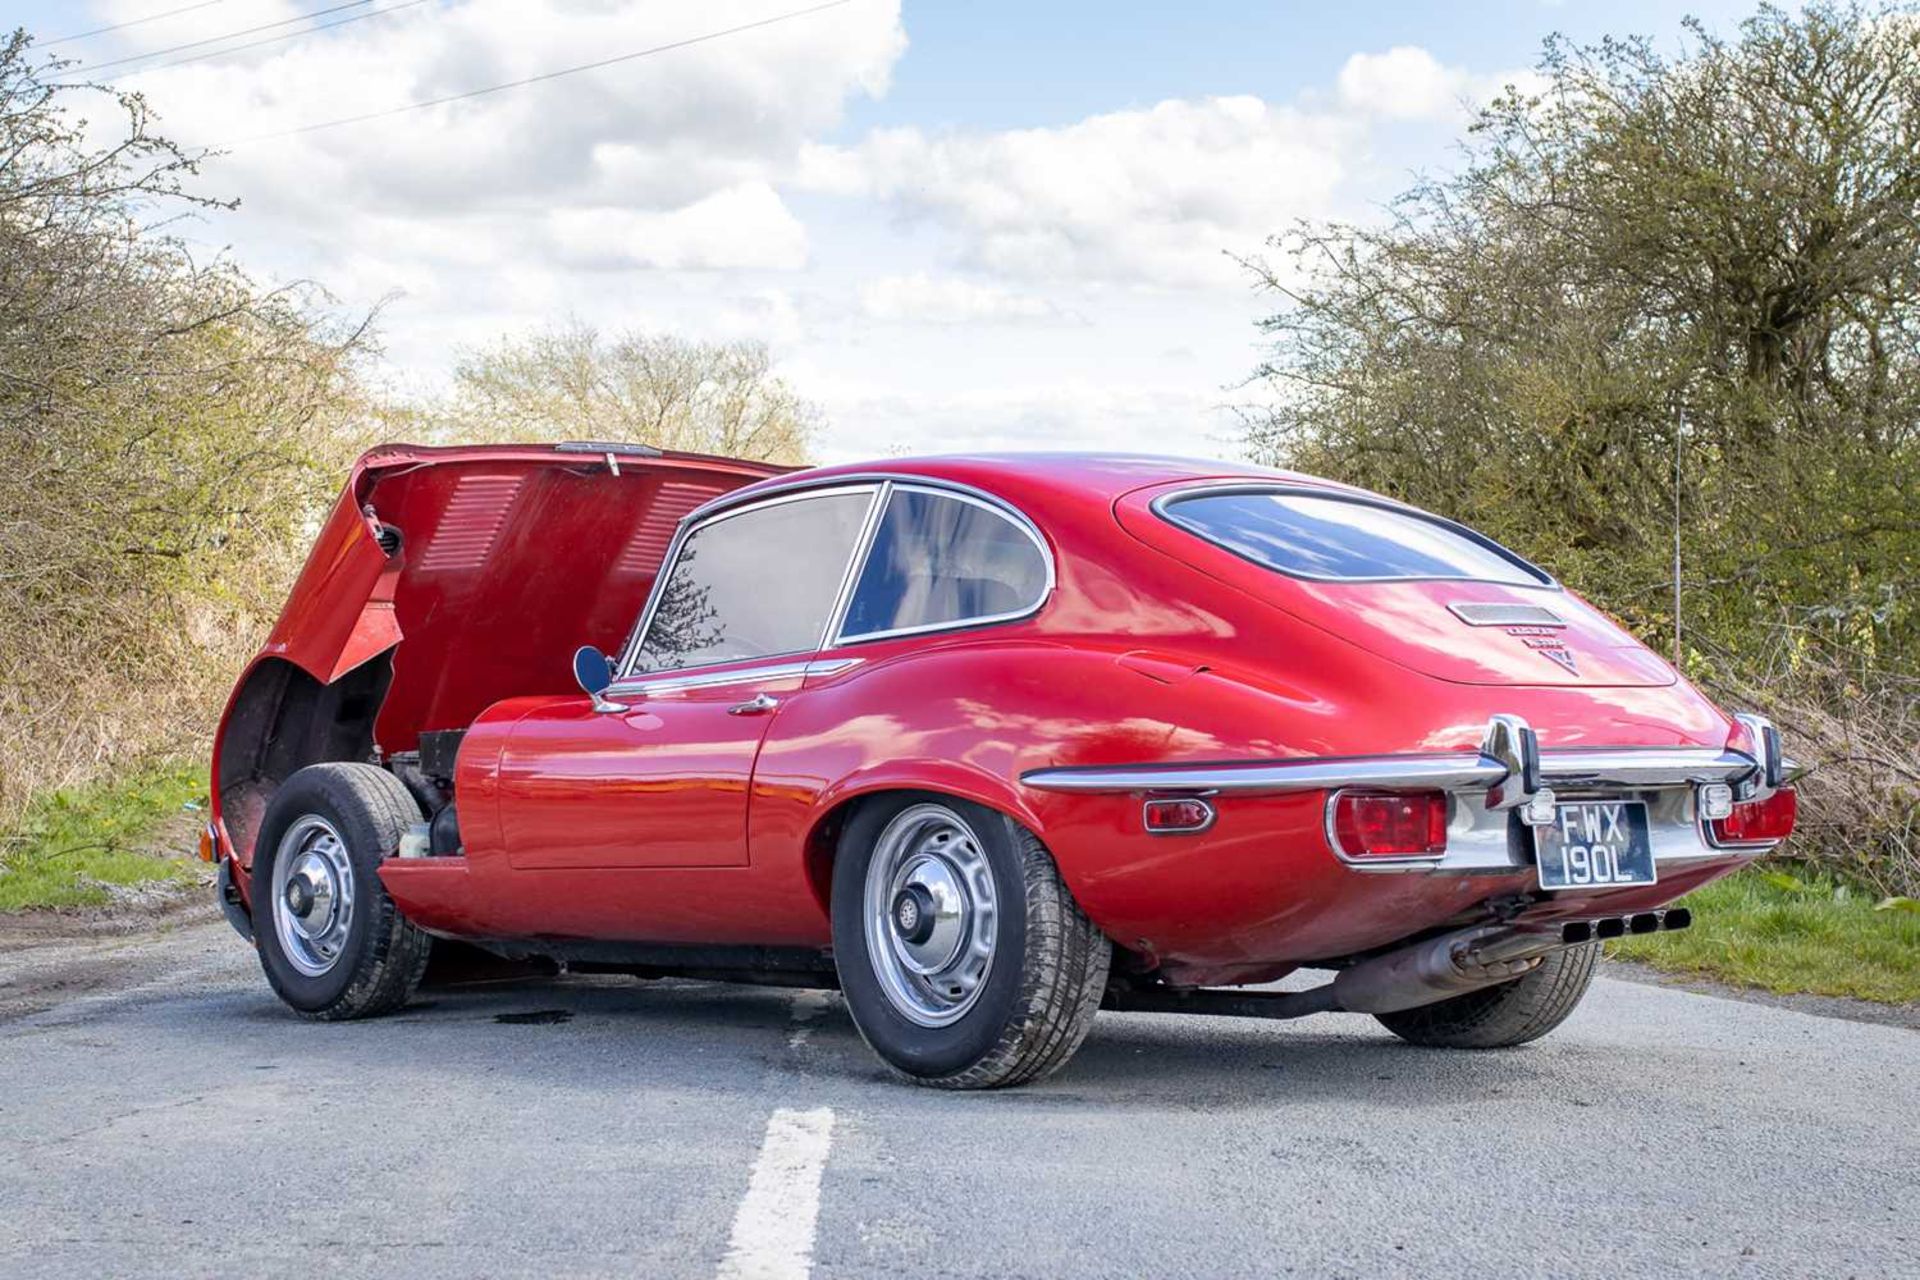 1973 Jaguar E-Type Coupe 5.3 V12 Three owners from new - Image 24 of 79